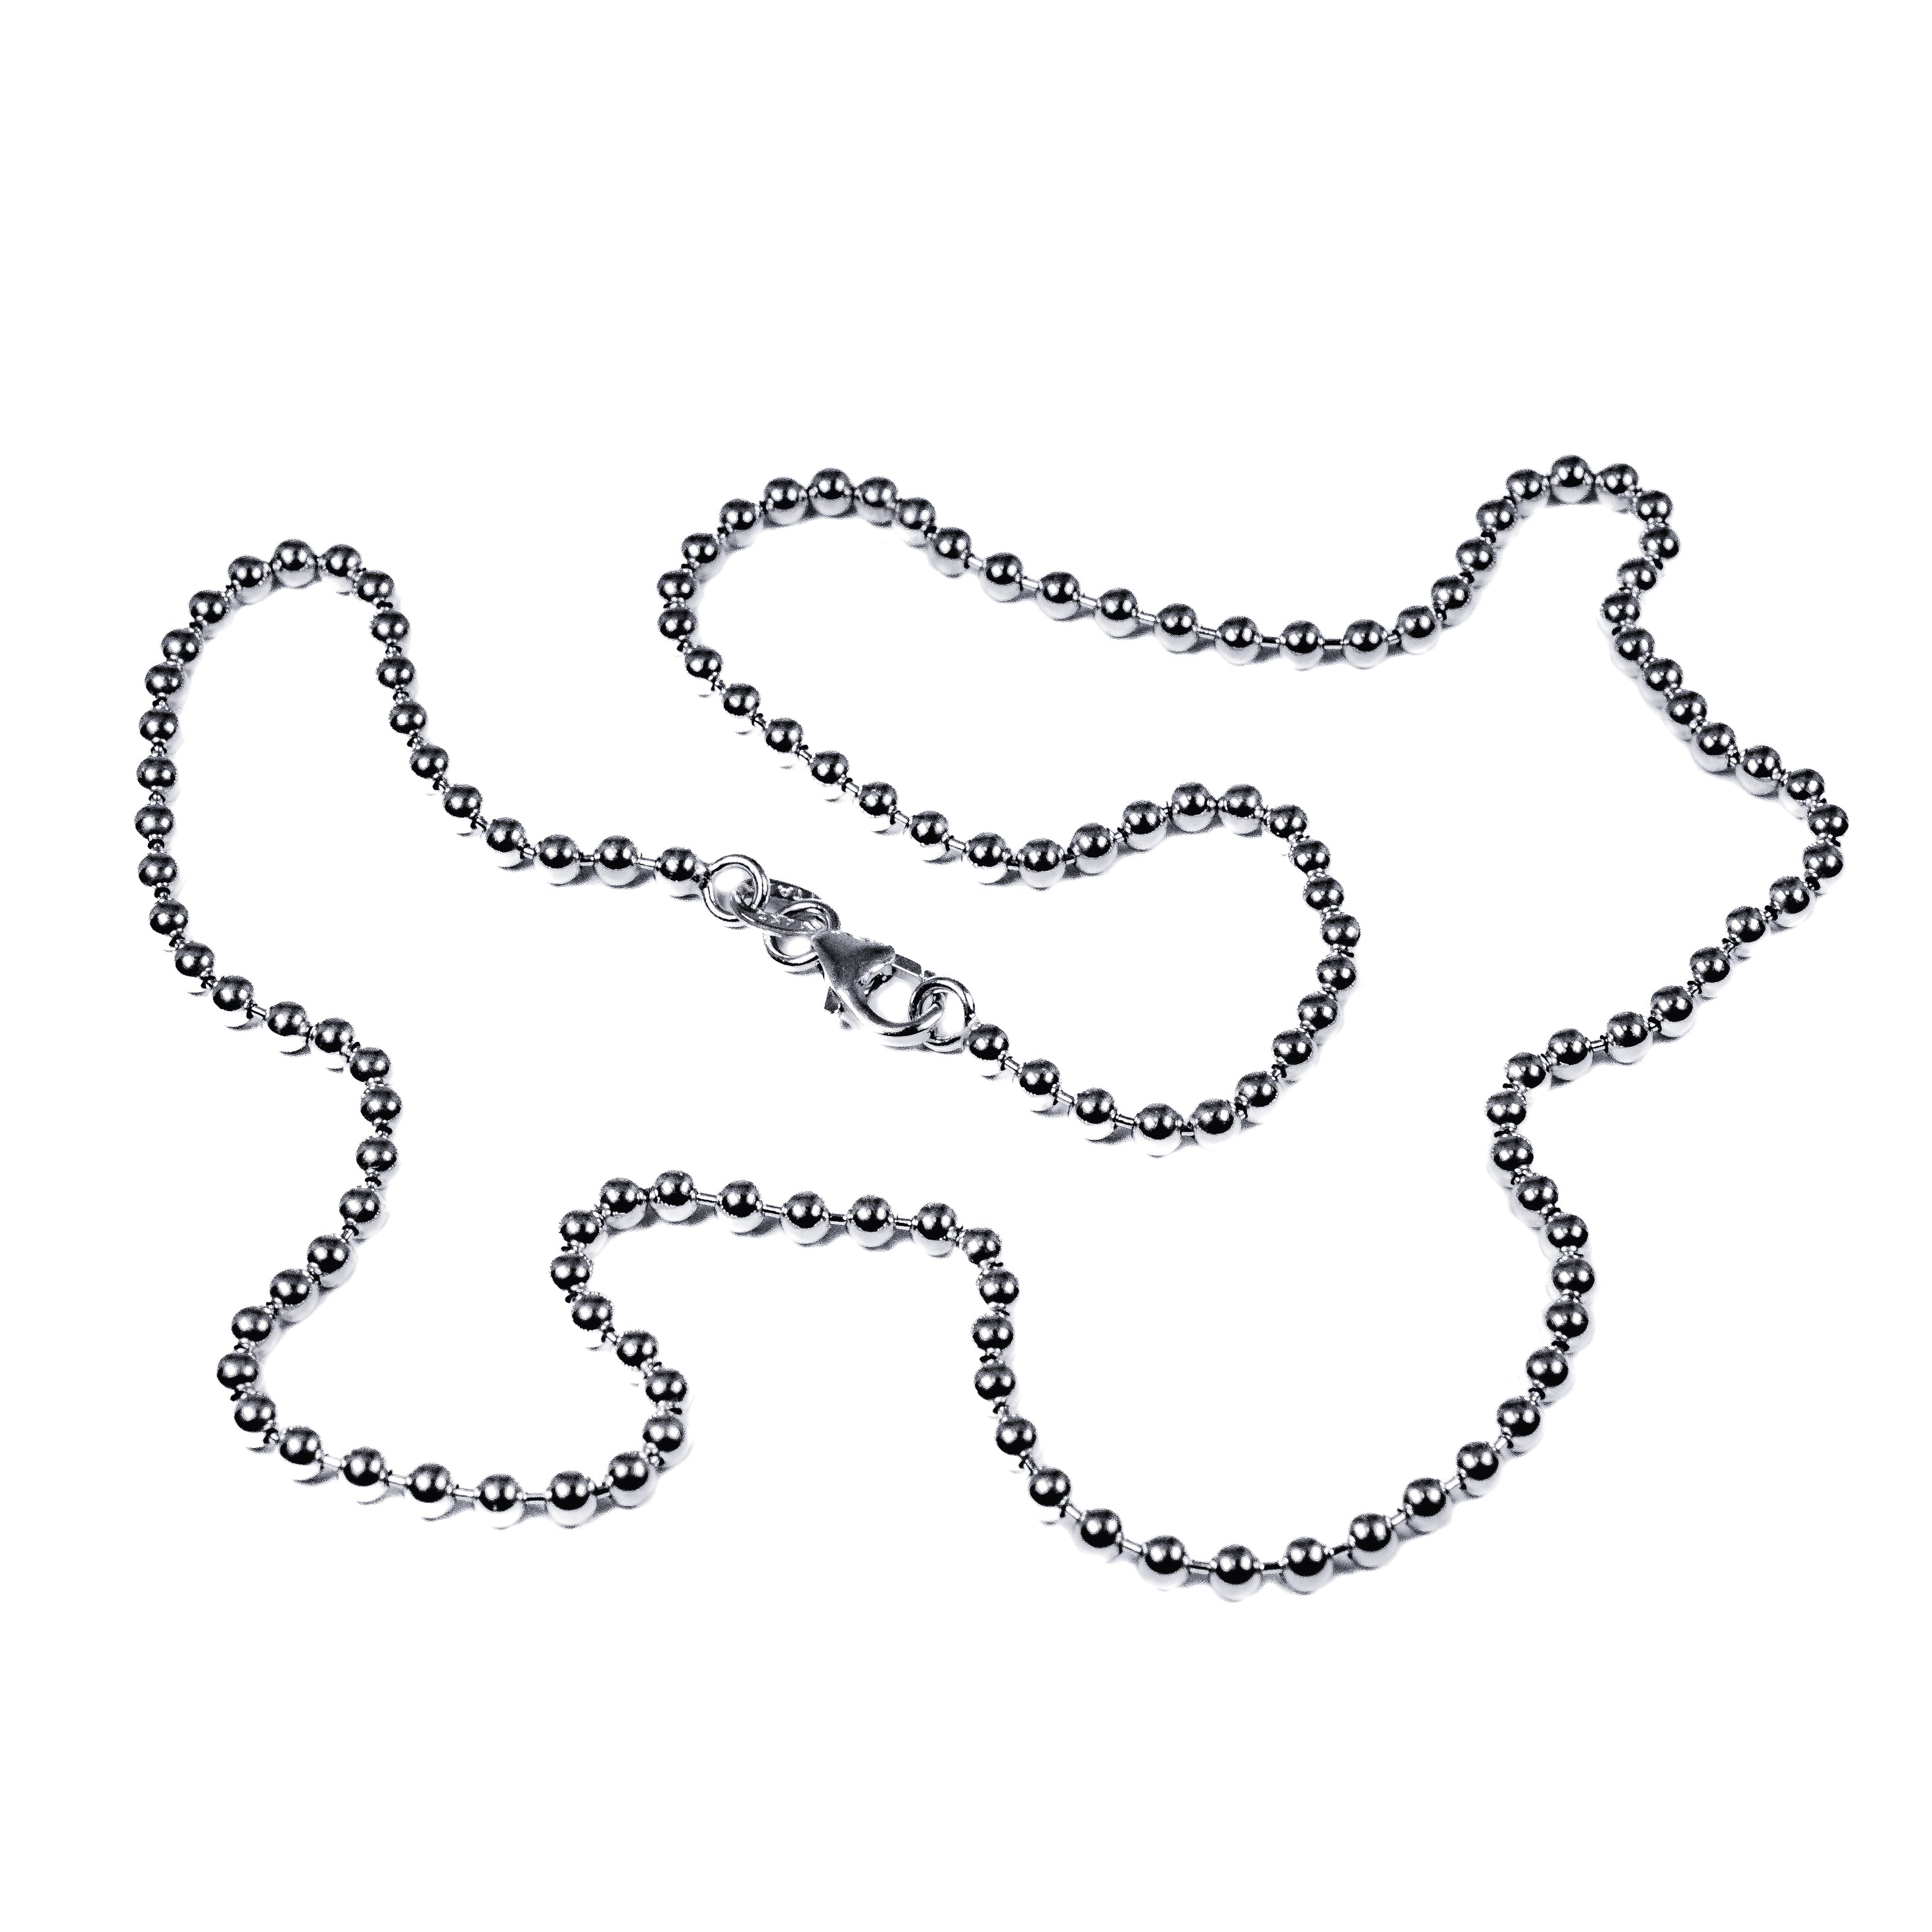 14kt White Gold Bead 2.5mm Chain 18"